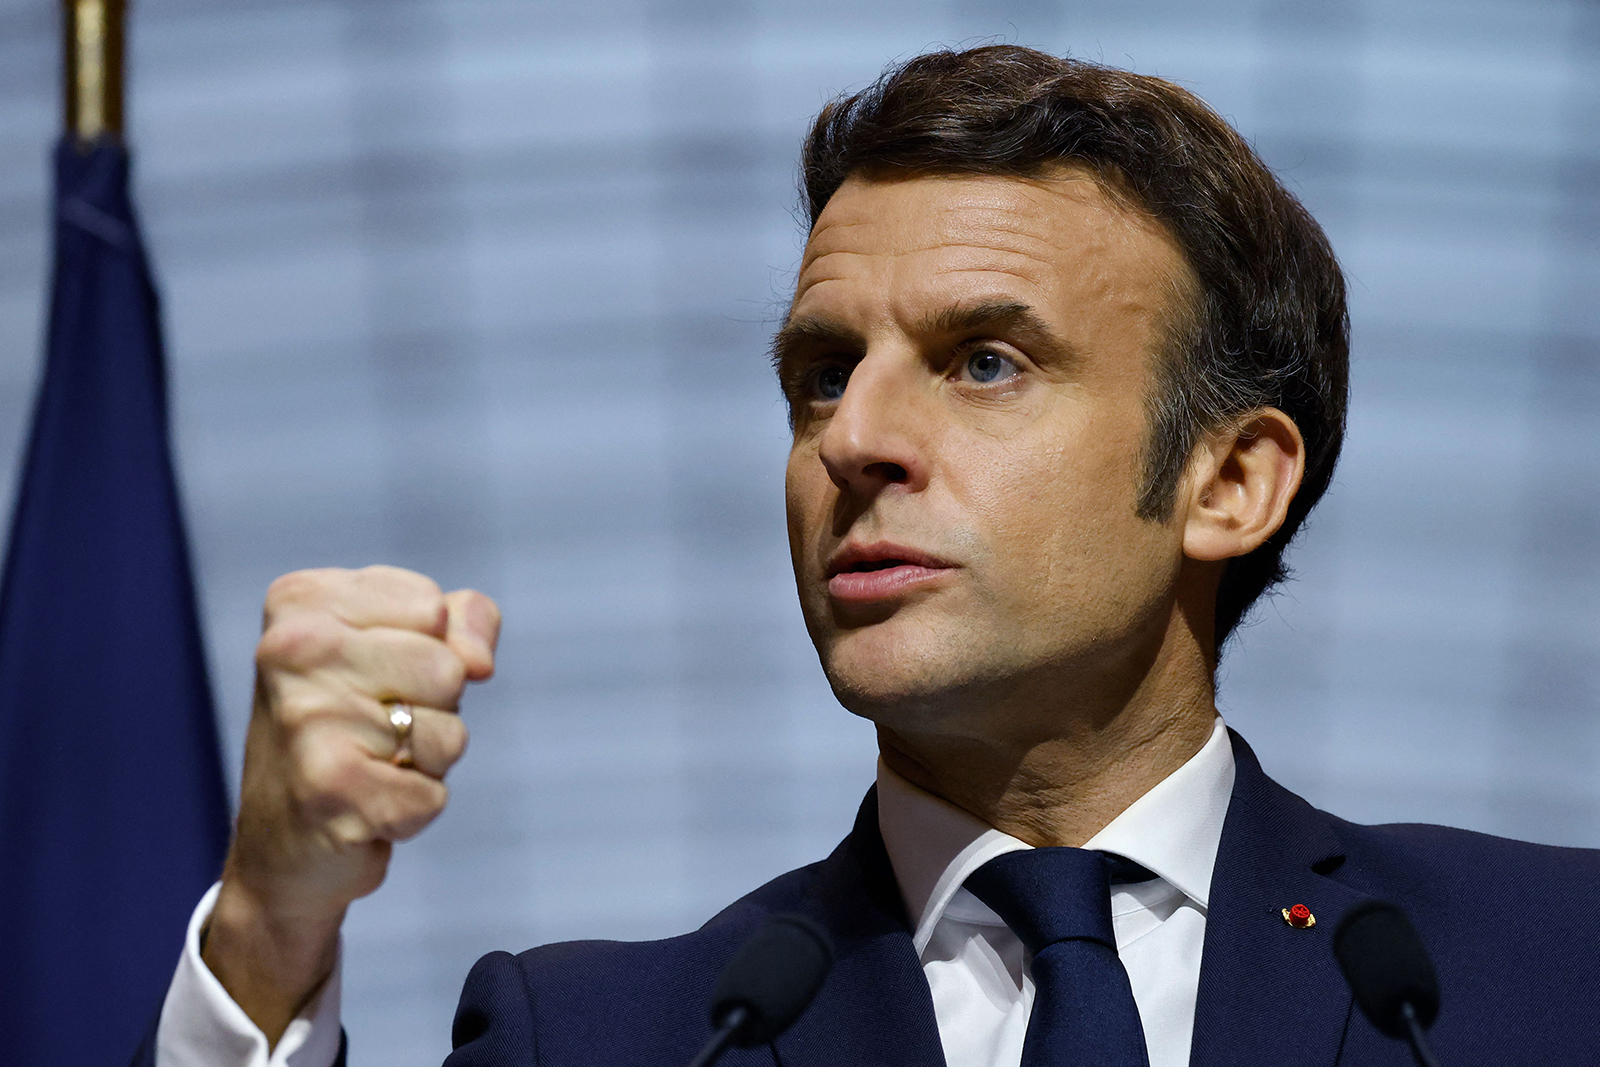 France's President Emmanuel Macron holds a press conference on March 11.